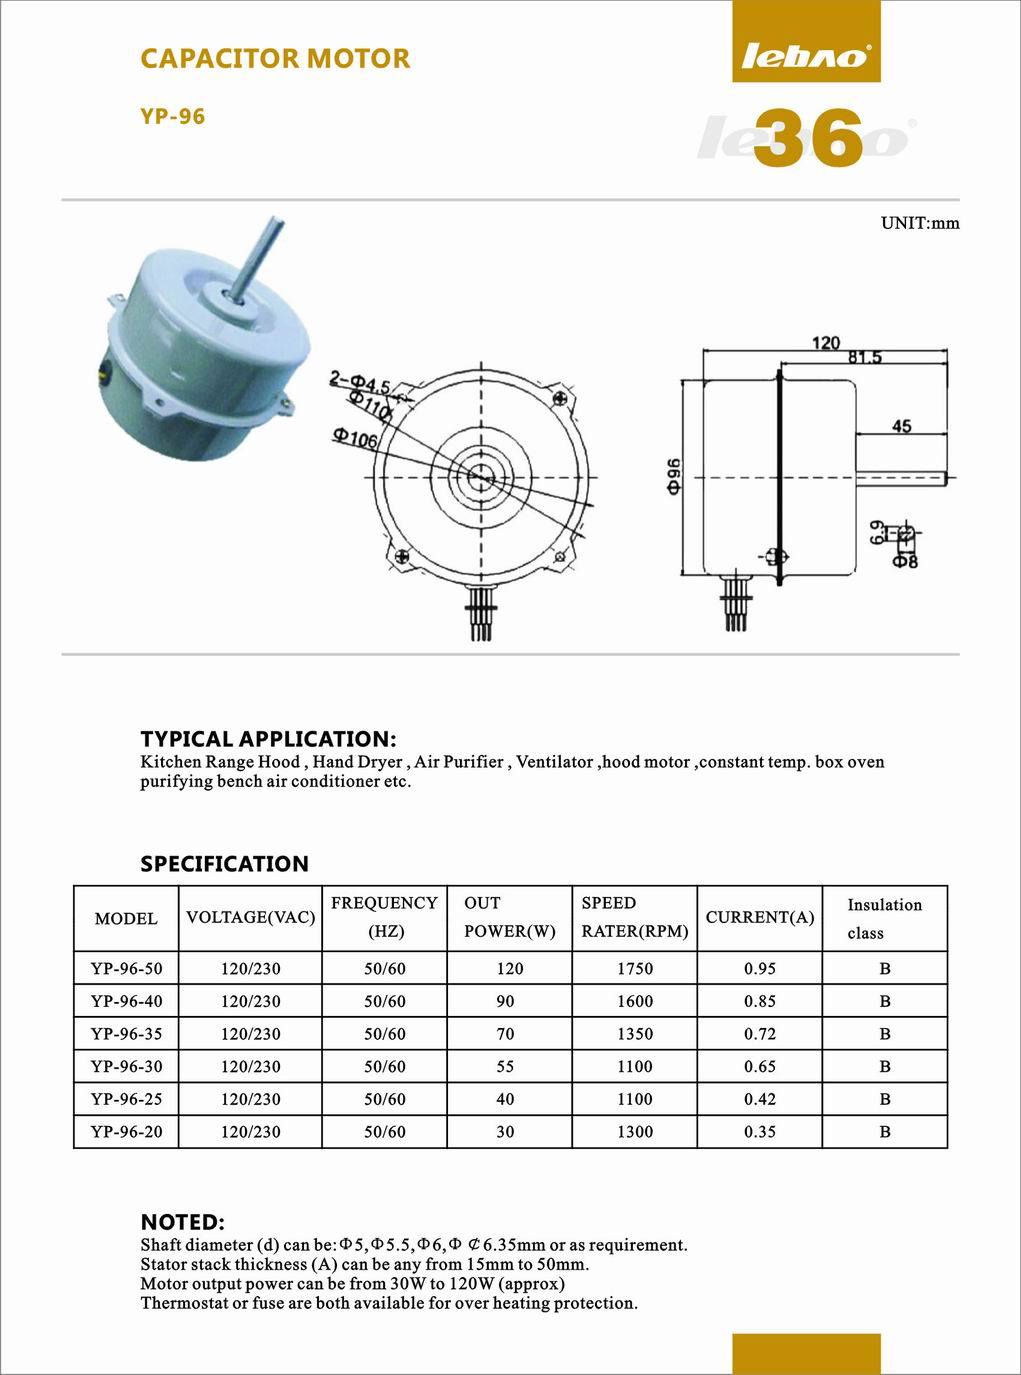 Capacitor Motor for Air Conditioner